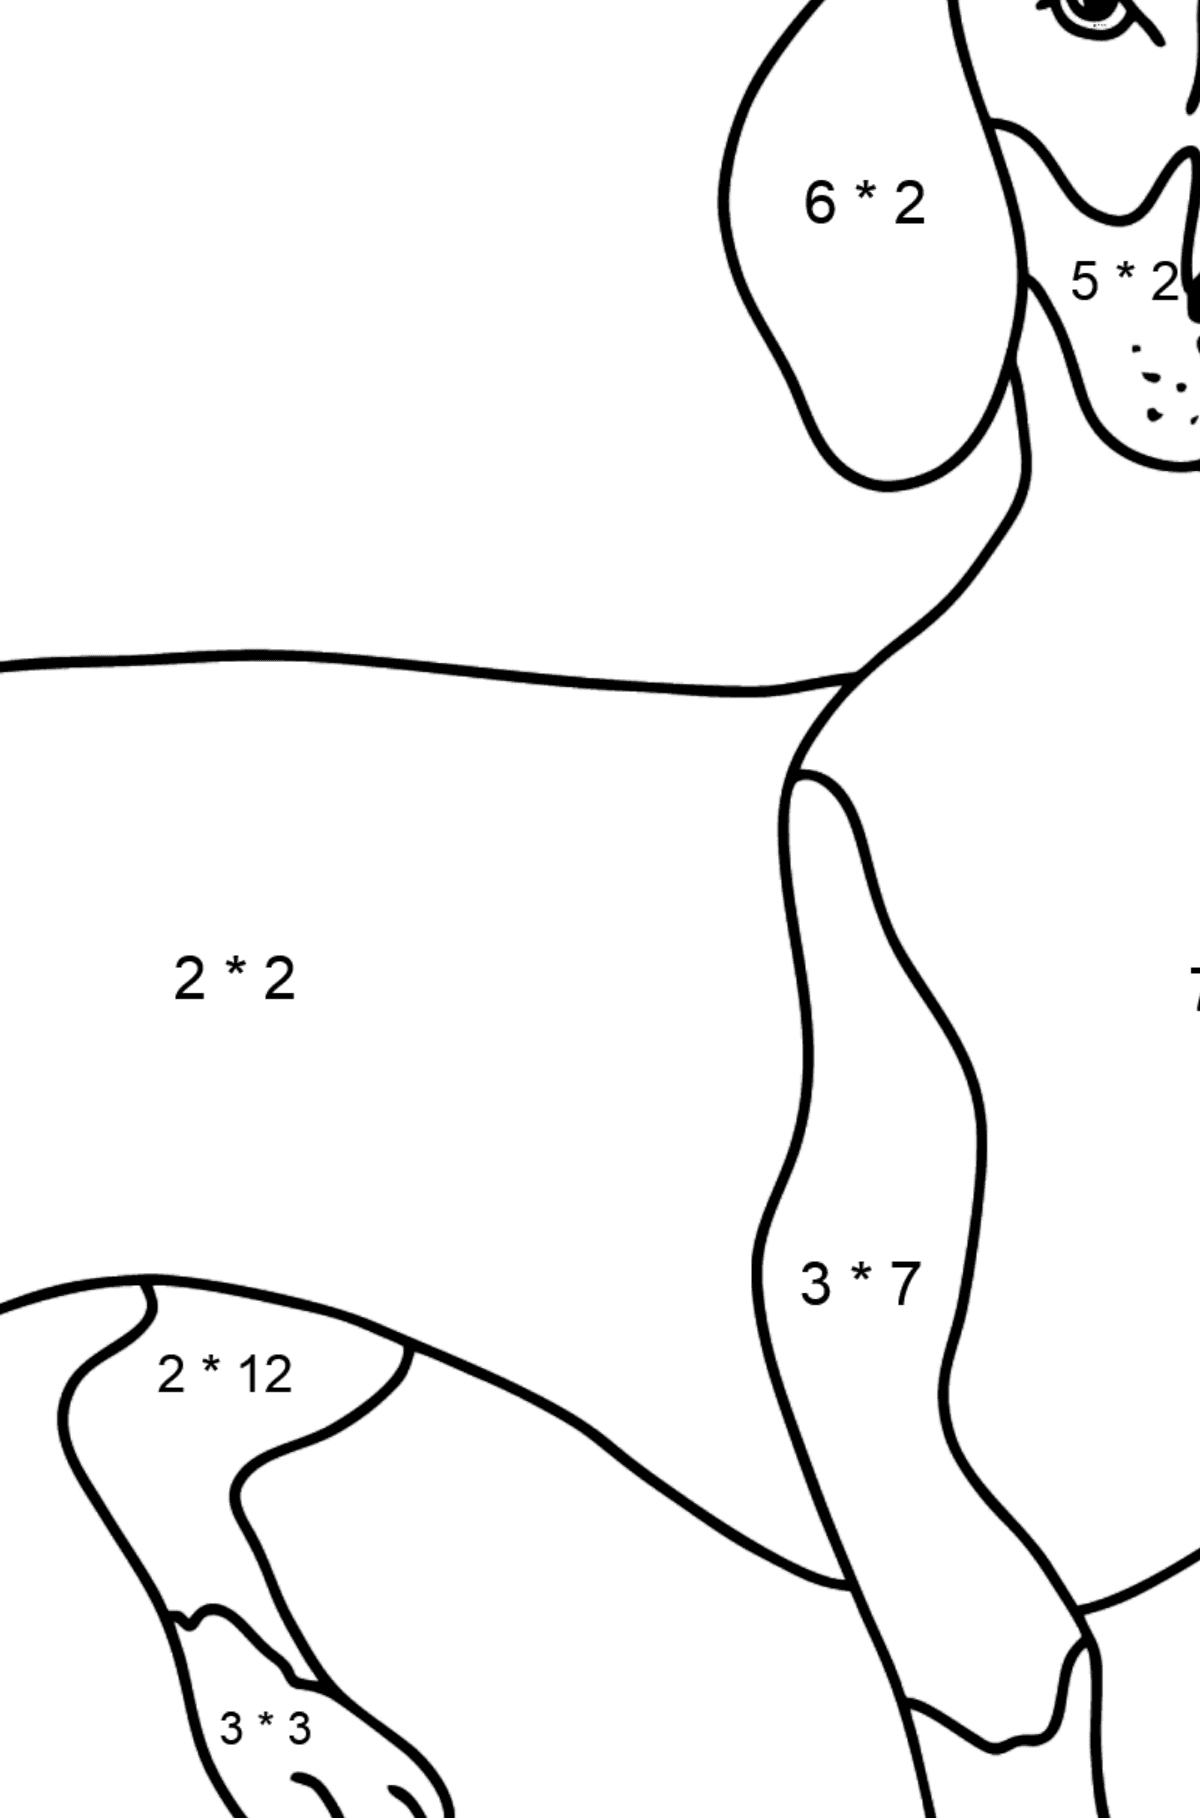 Dachshund coloring page - Math Coloring - Multiplication for Kids